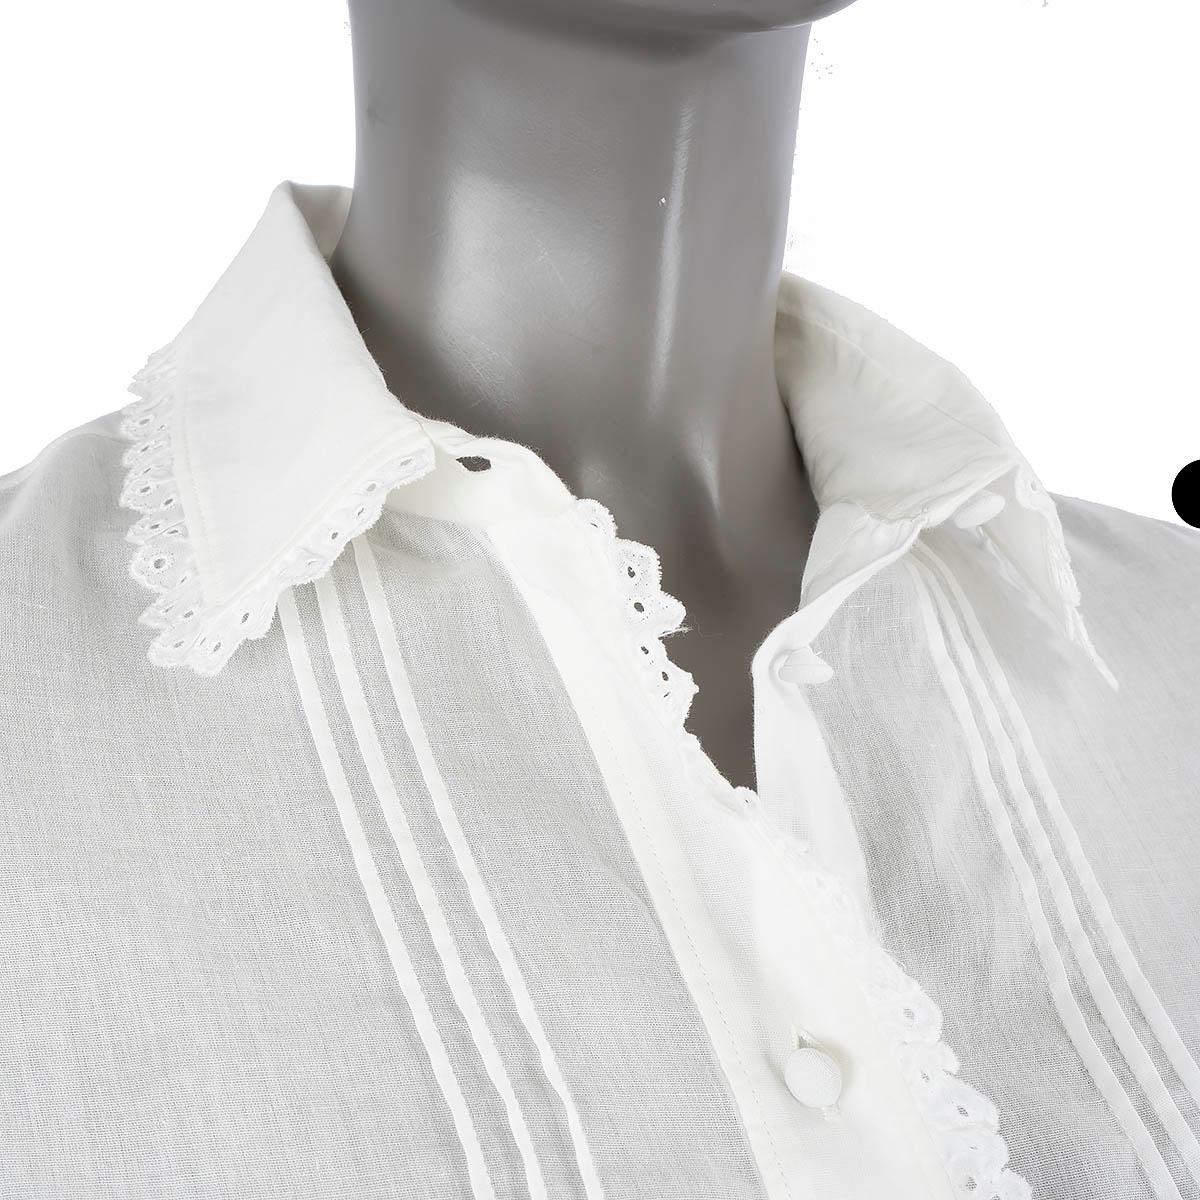 SAINT LAURENT white cotton 2015 BRODERIE ANGLAISE SHEER Blouse Shirt 36 XS For Sale 1